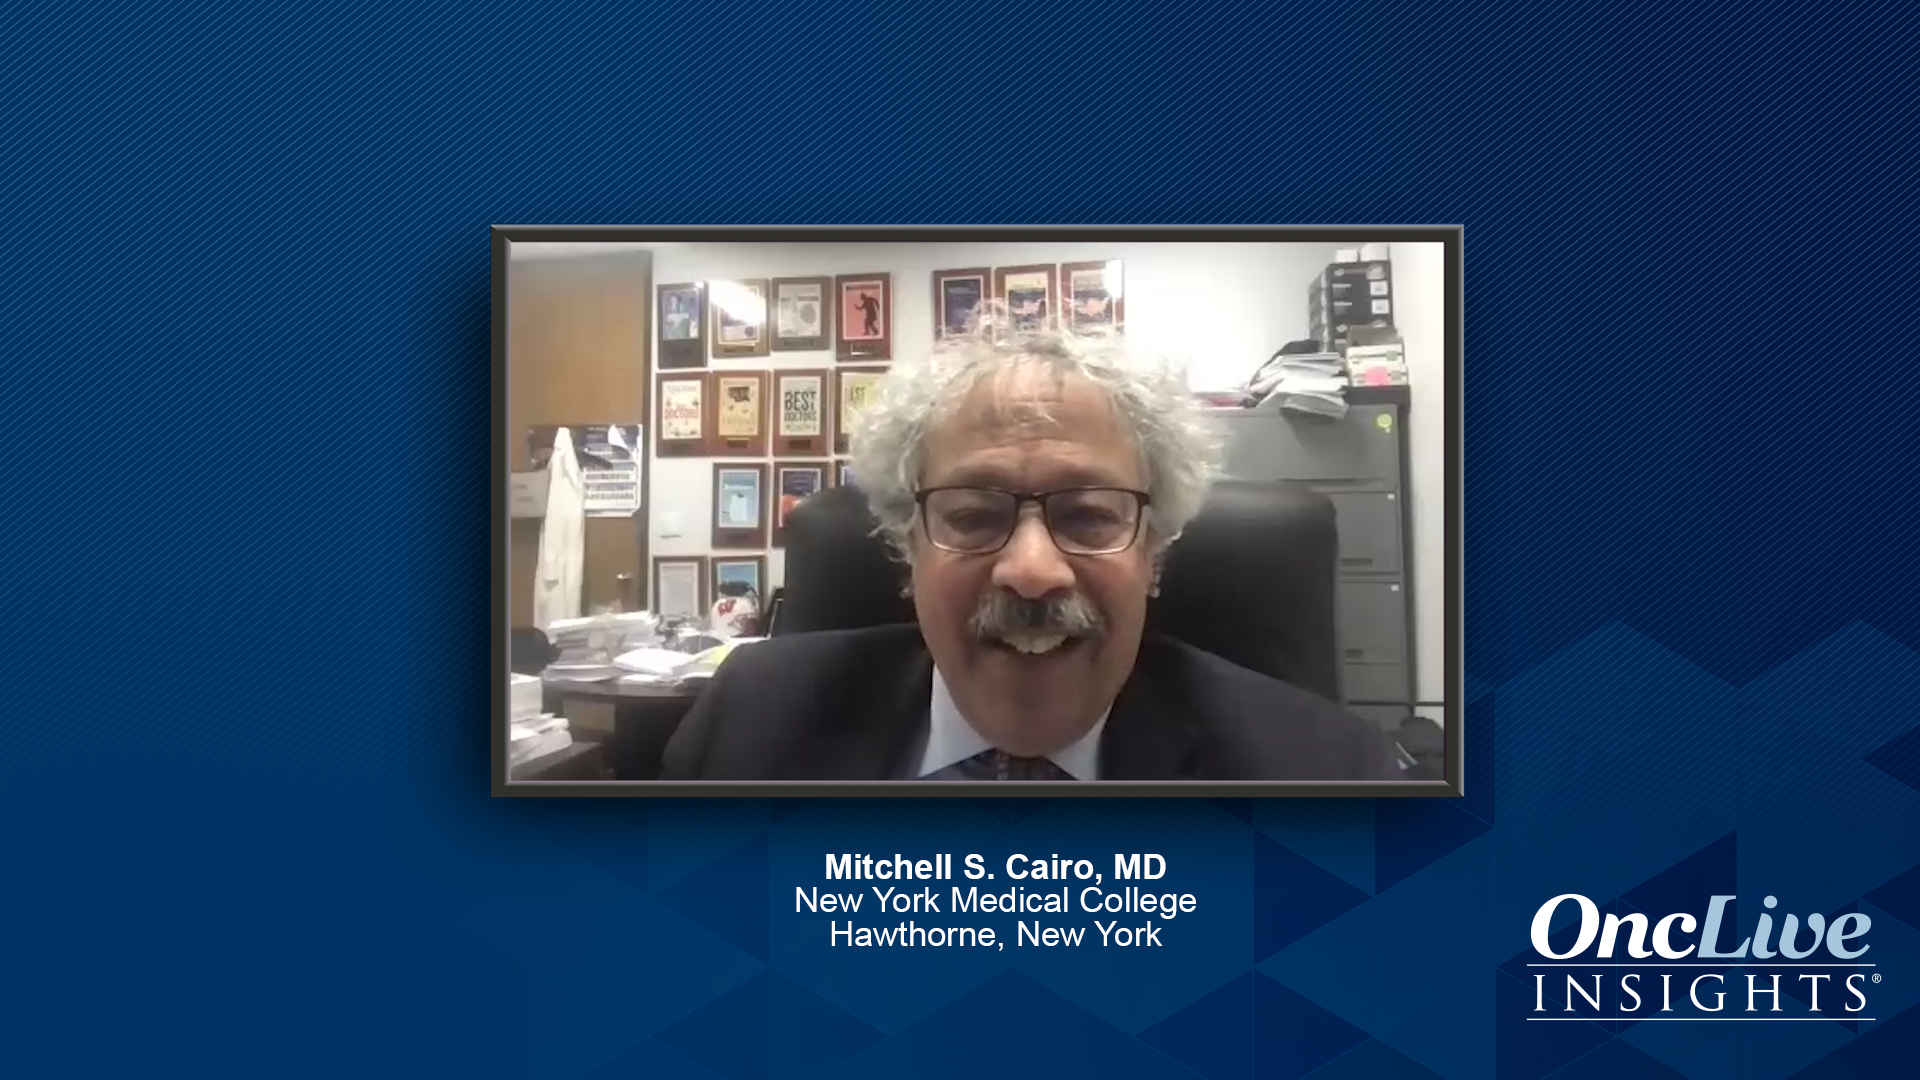 Mitchell S. Cairo, MD, an expert on veno-occlusive disease